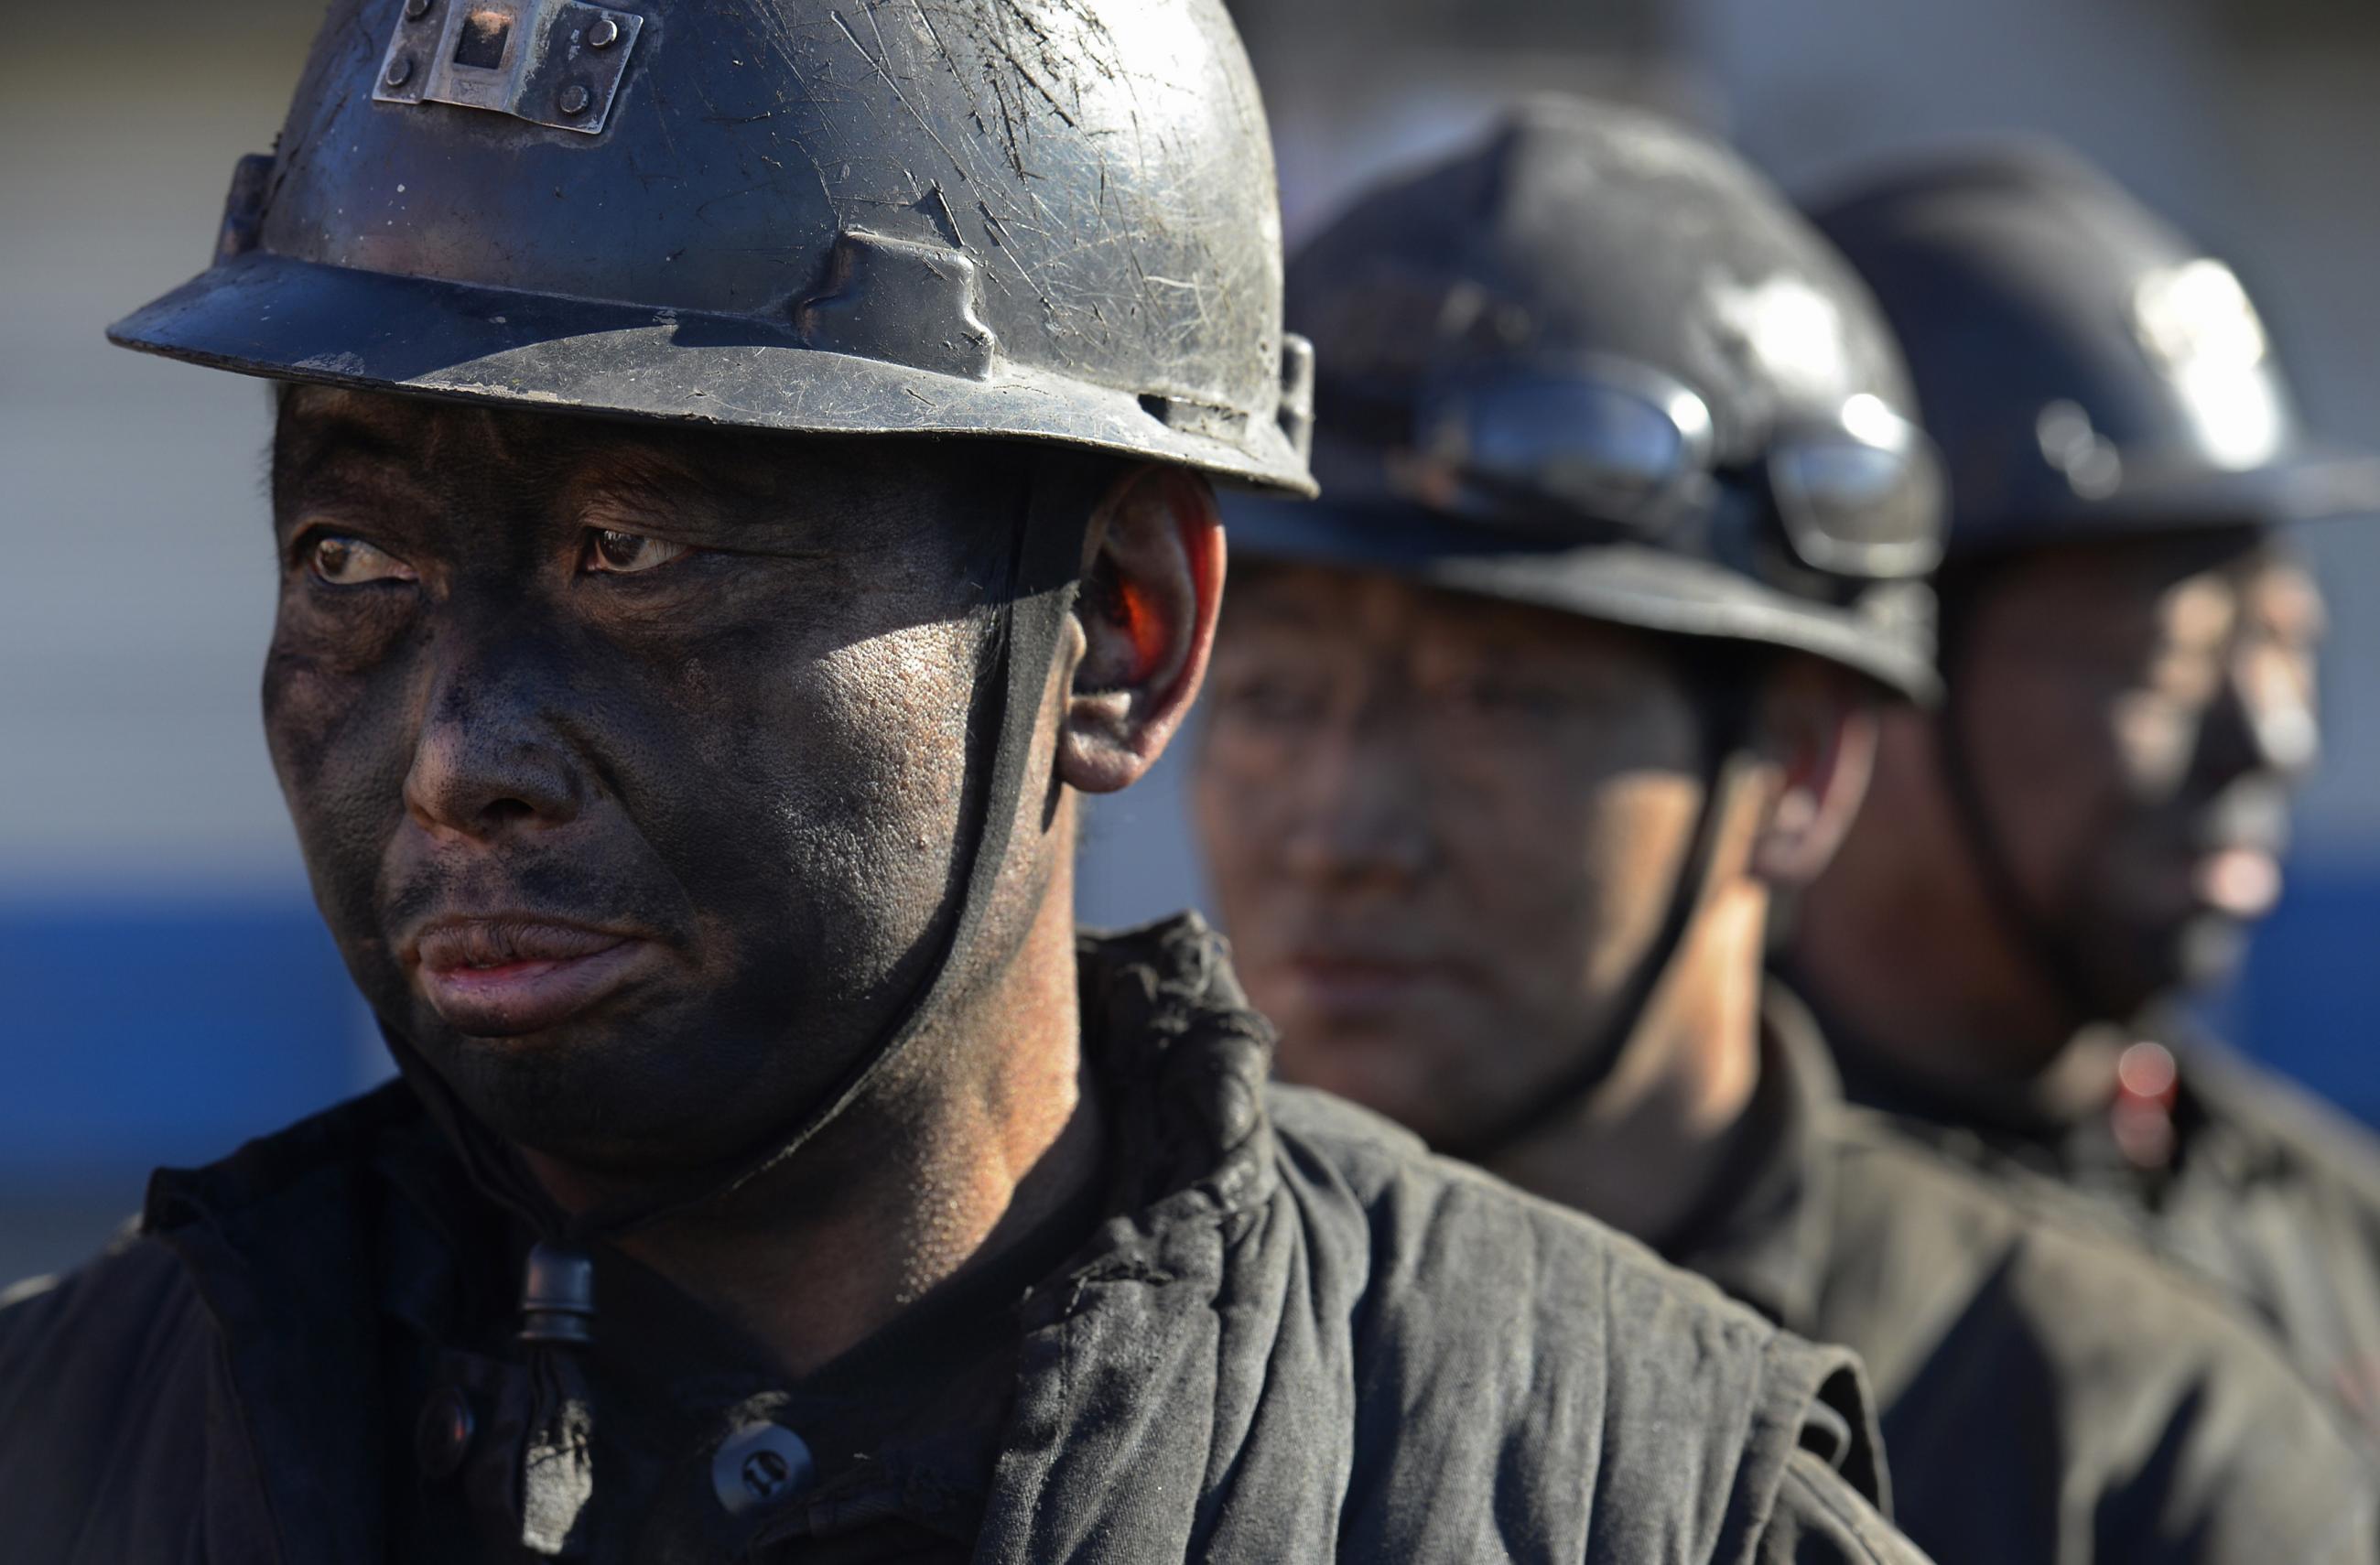 A close-up photo of the soot-covered faces of three coal miners wearing dark hard hats as they wait in line to shower during a break near a coal mine in Heshun county, Shanxi province, China, on December 5, 2014. 